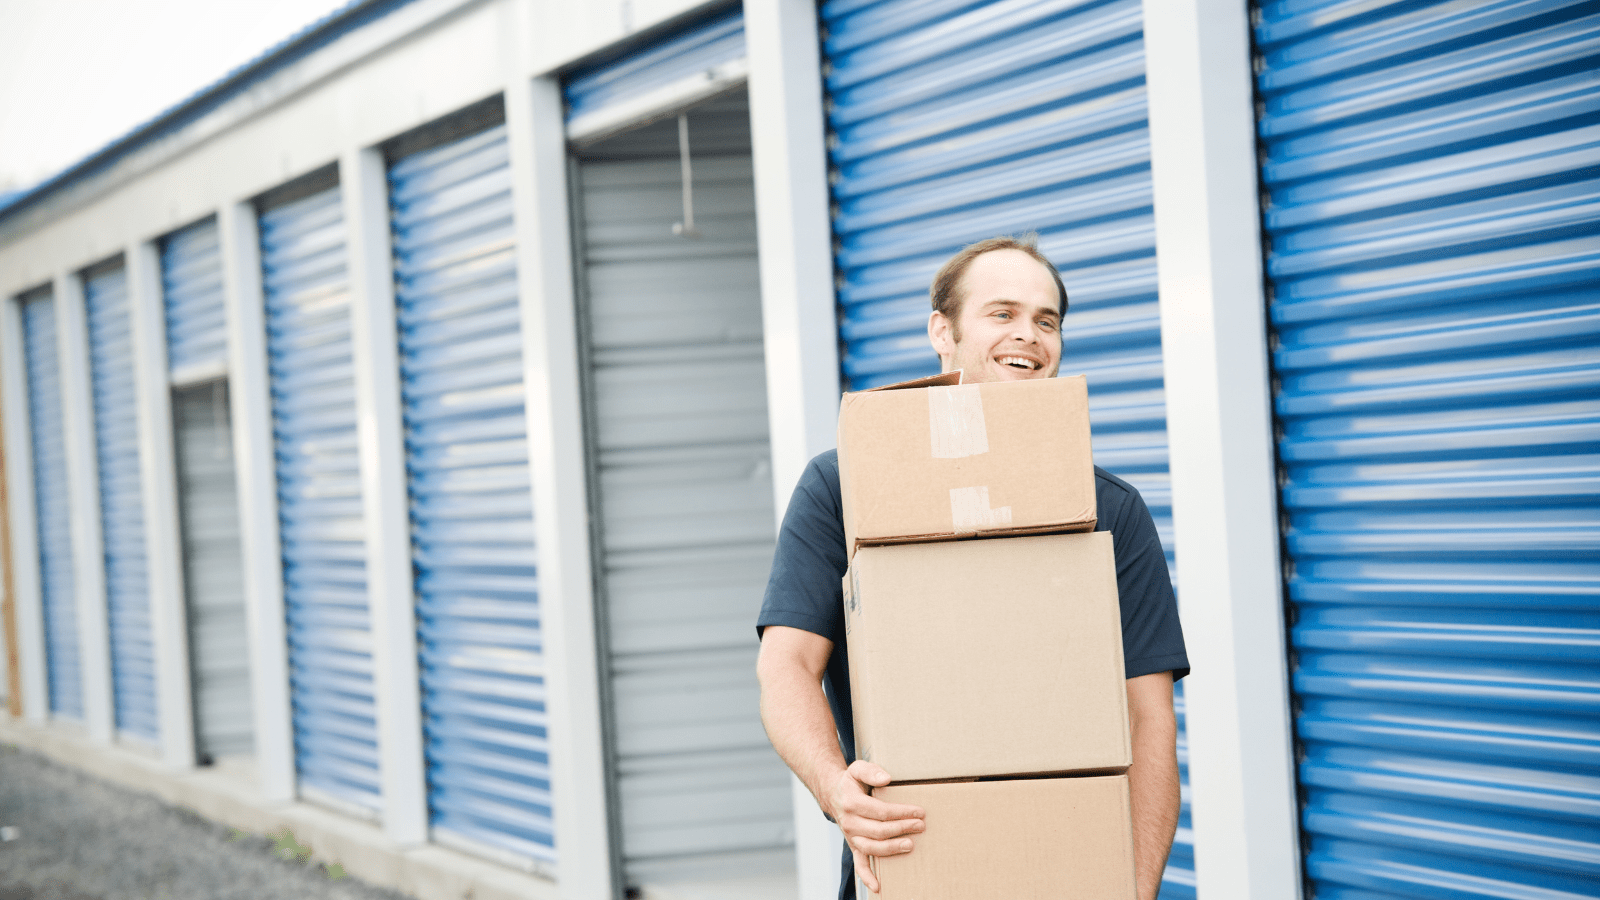 Man moving boxes out of a storage unit